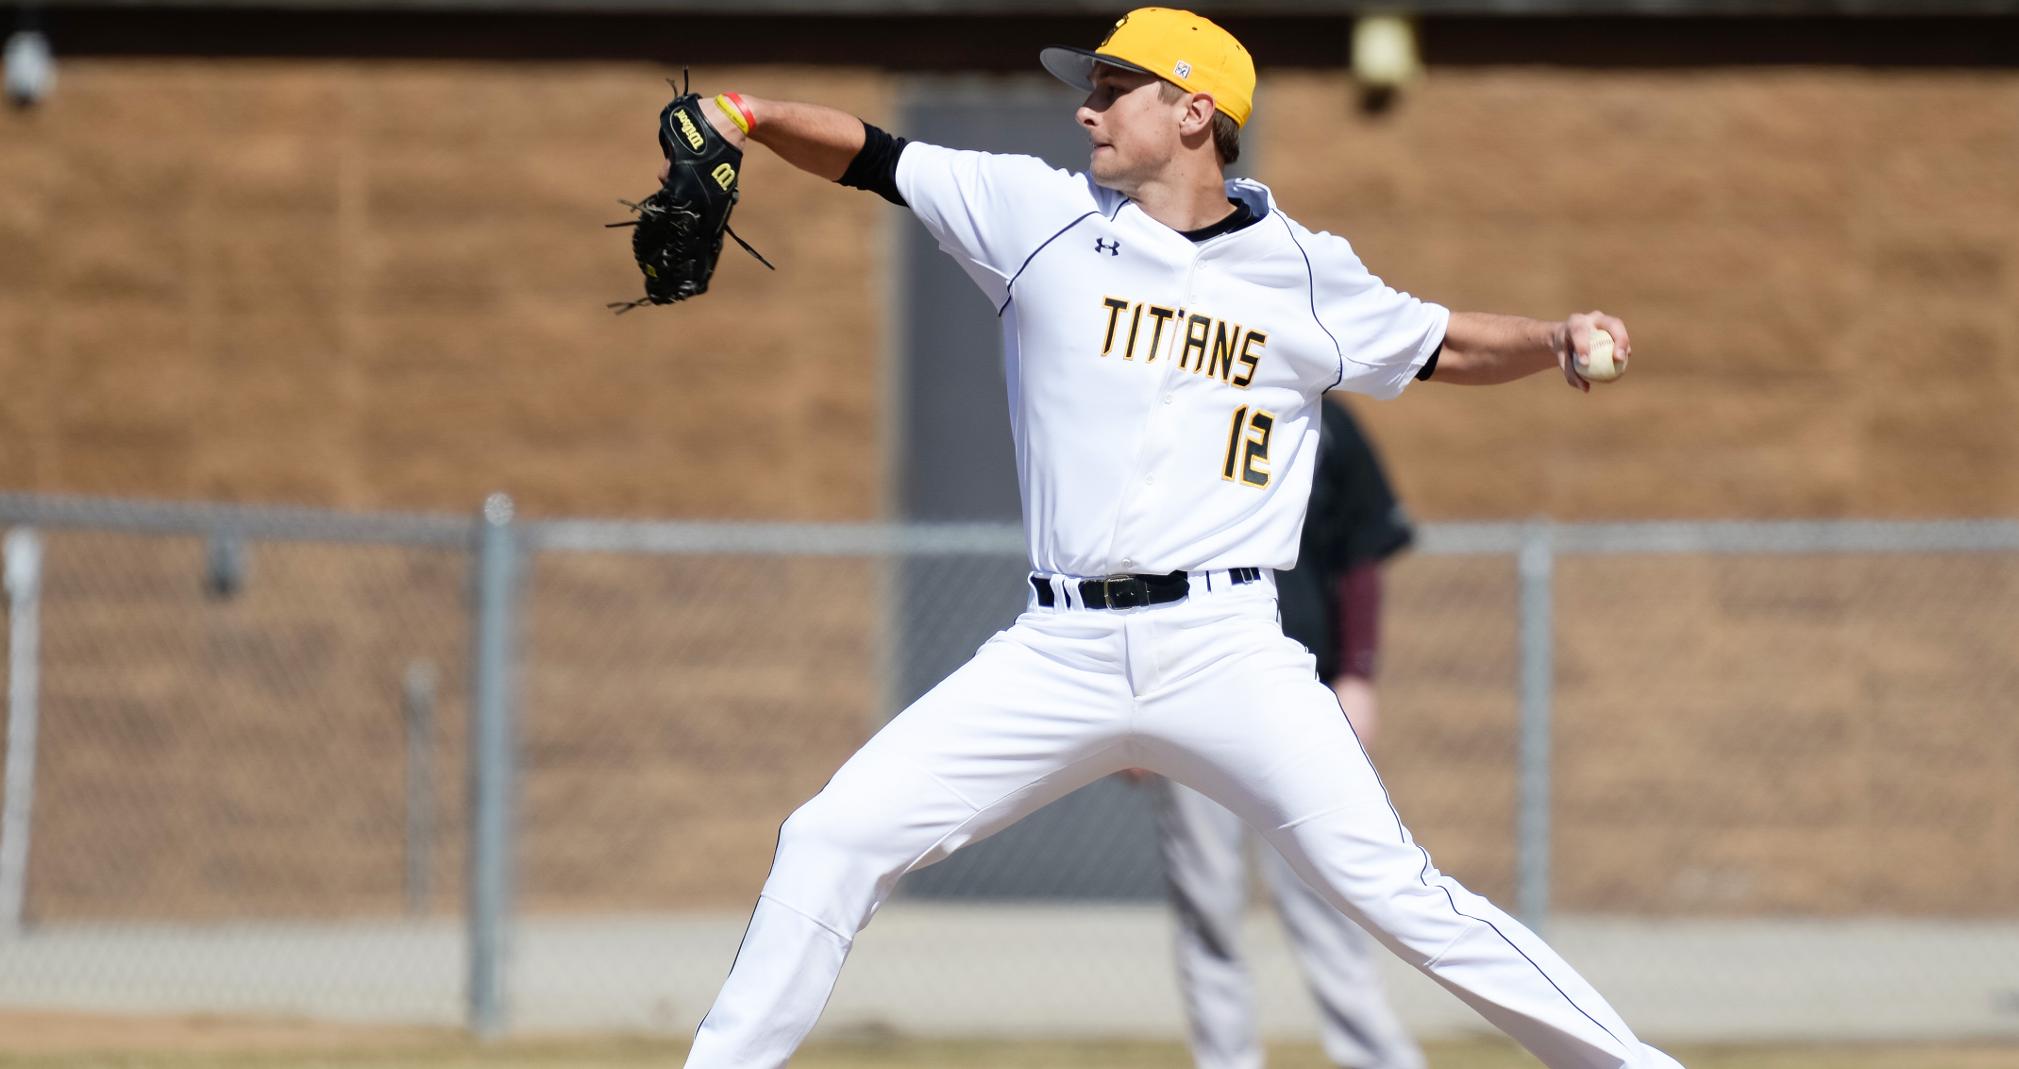 Peter Jewell held UW-Platteville to just three runs and four hits in eight innings pitched.